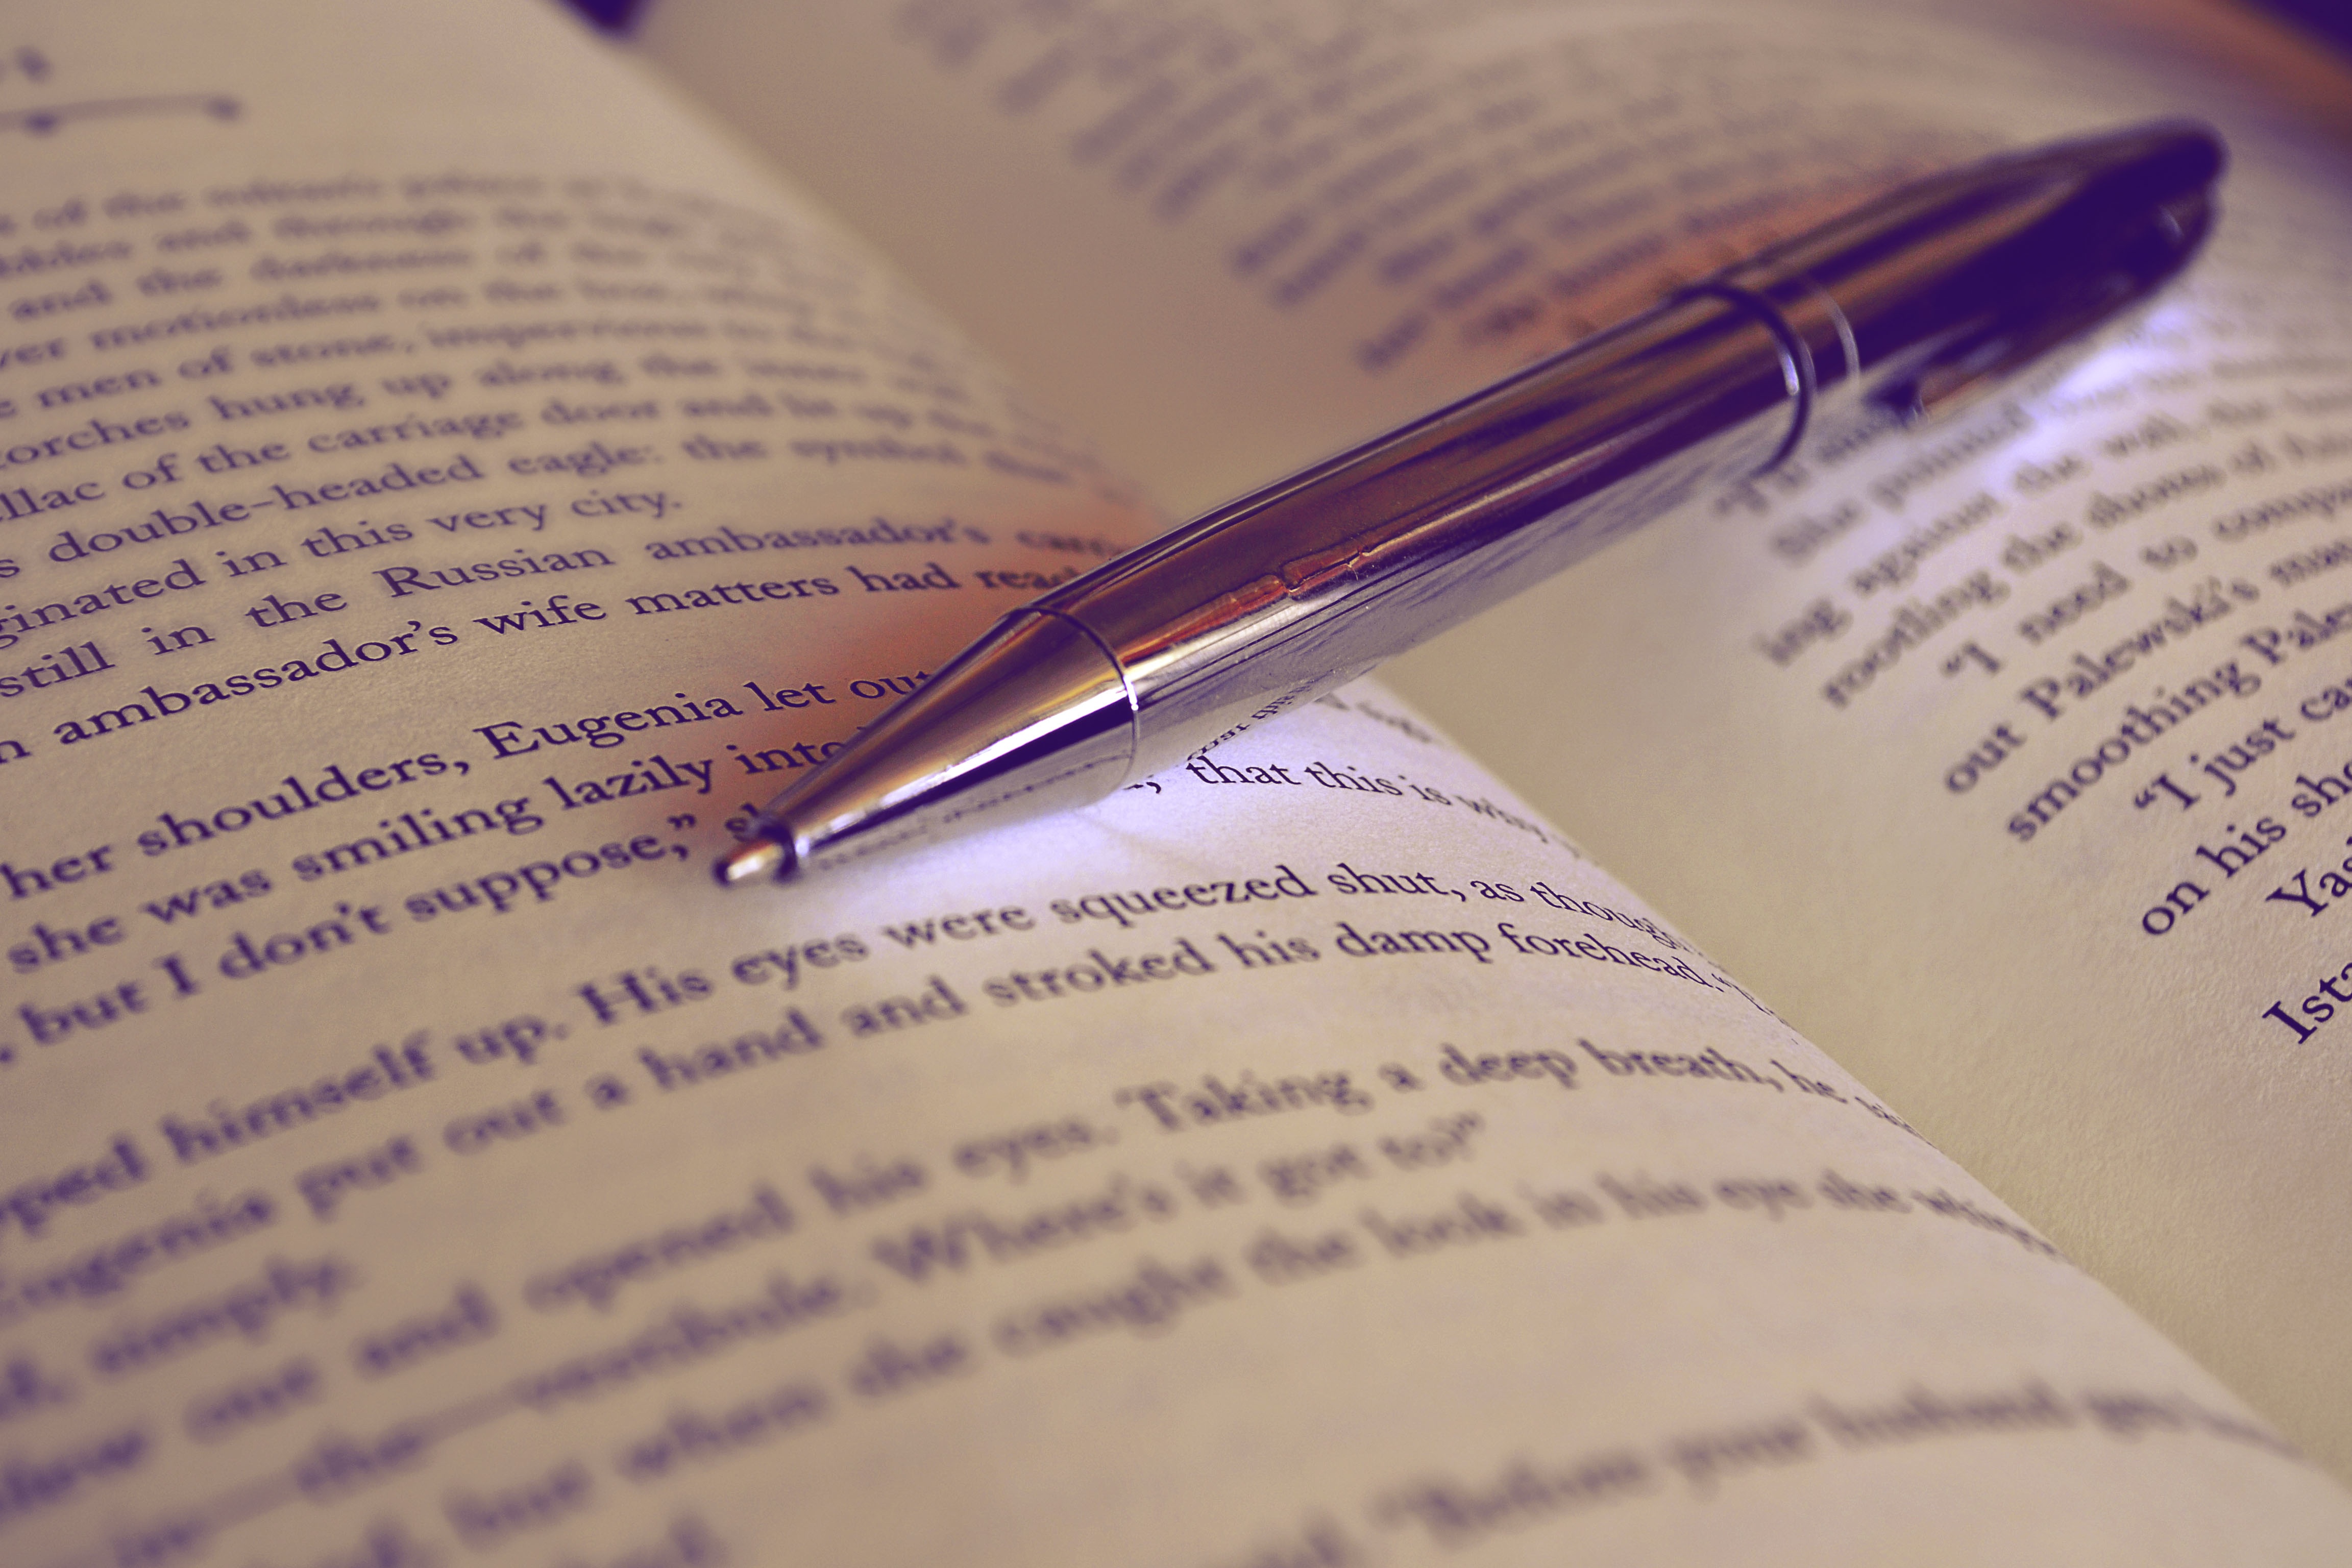 pen displayed on an open book